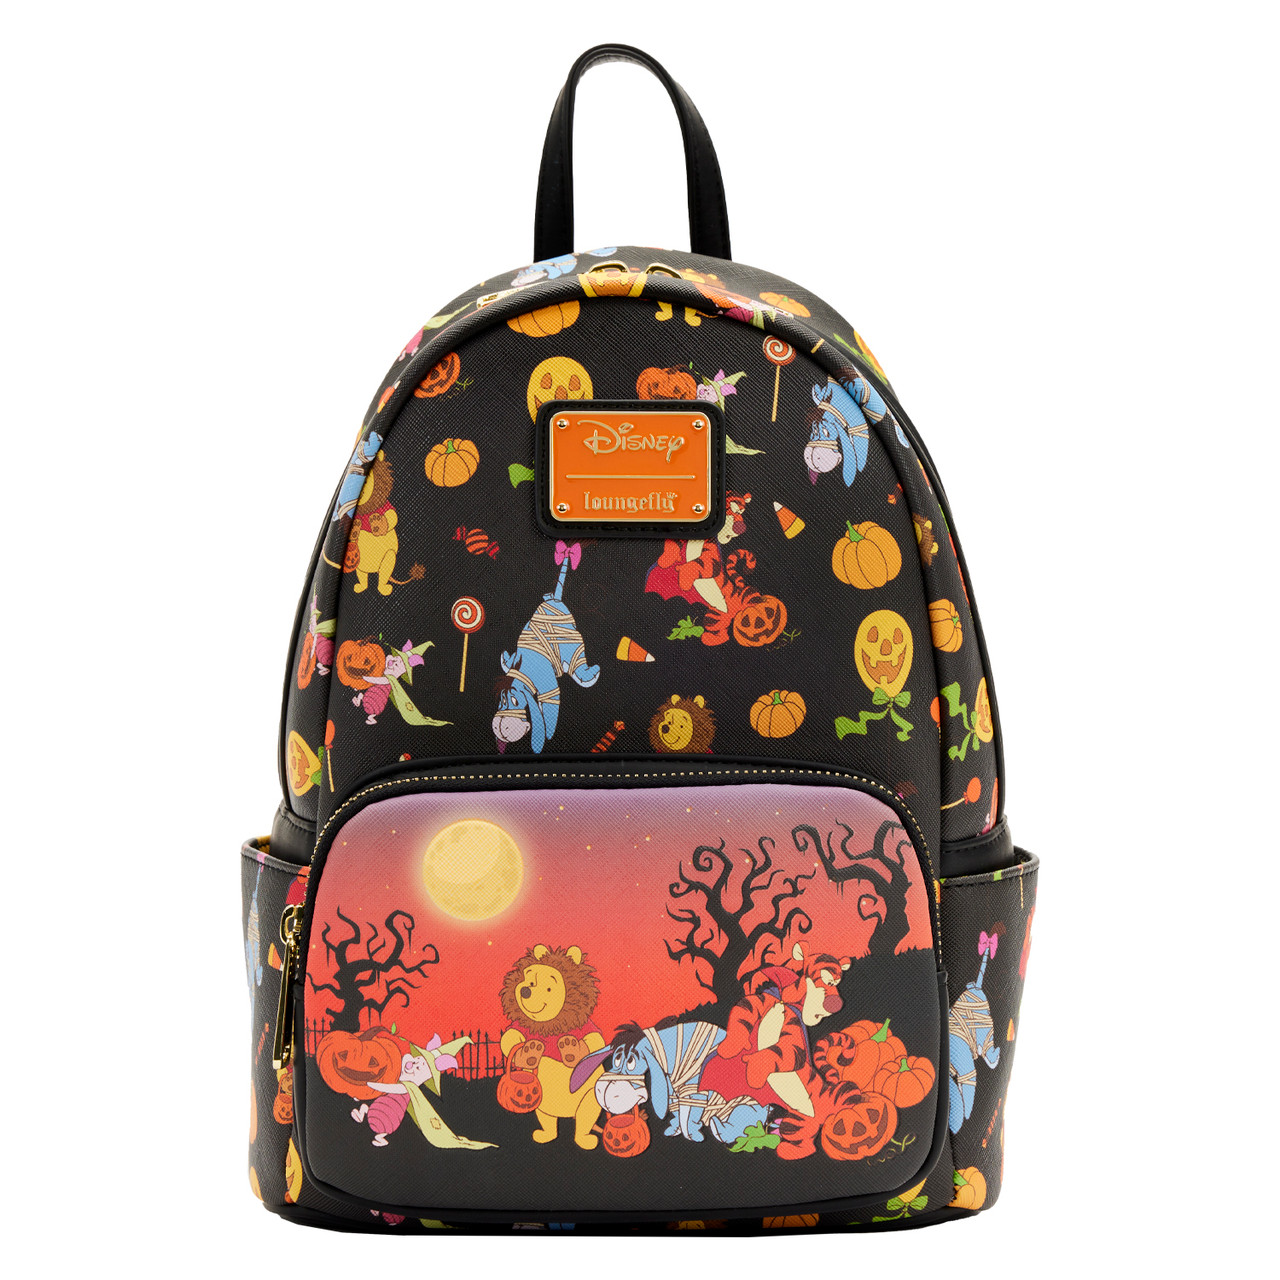 Buy Stitch Exclusive Spooky Stories Halloween Glow Mini Backpack at  Loungefly.